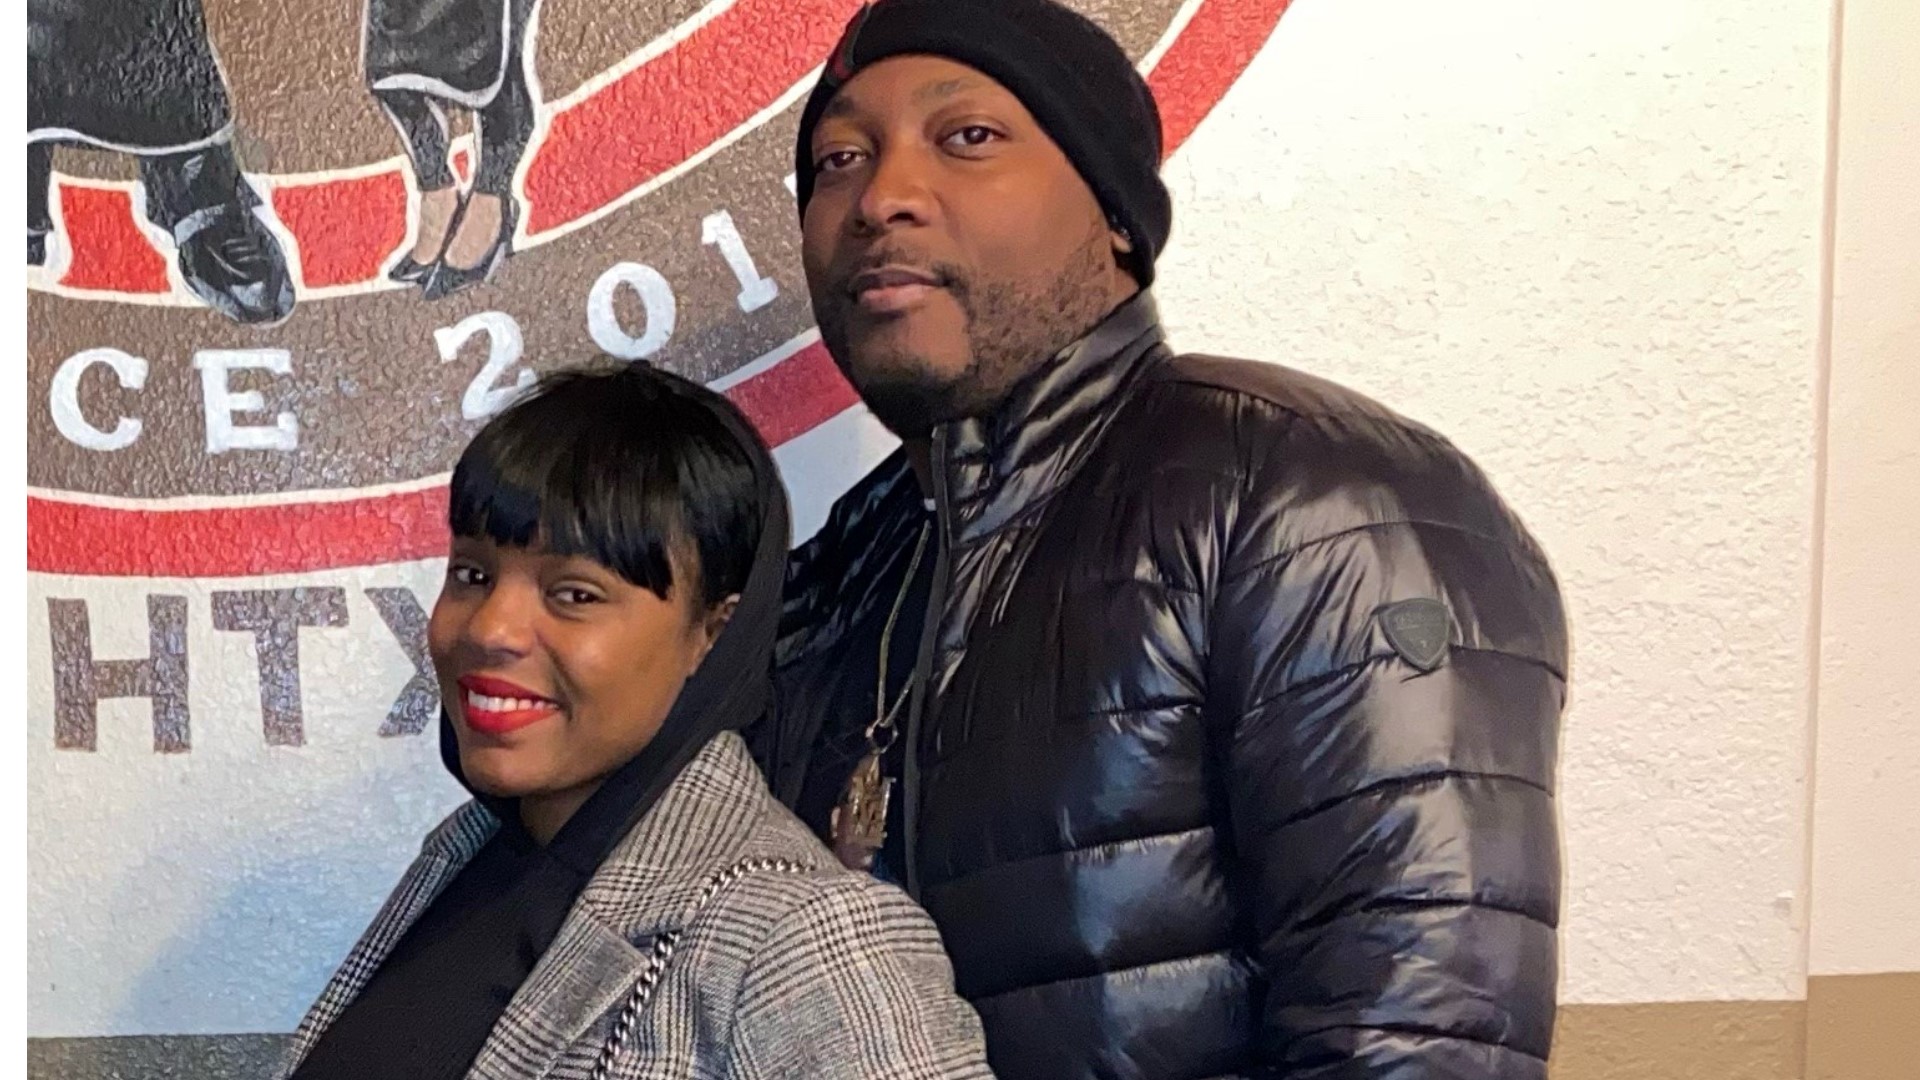 February 18, 2021: Burnetta Smith and her husband traveled to Houston for a Valentine's Day trip and now they're stuck in Texas amid the historic winter storm.